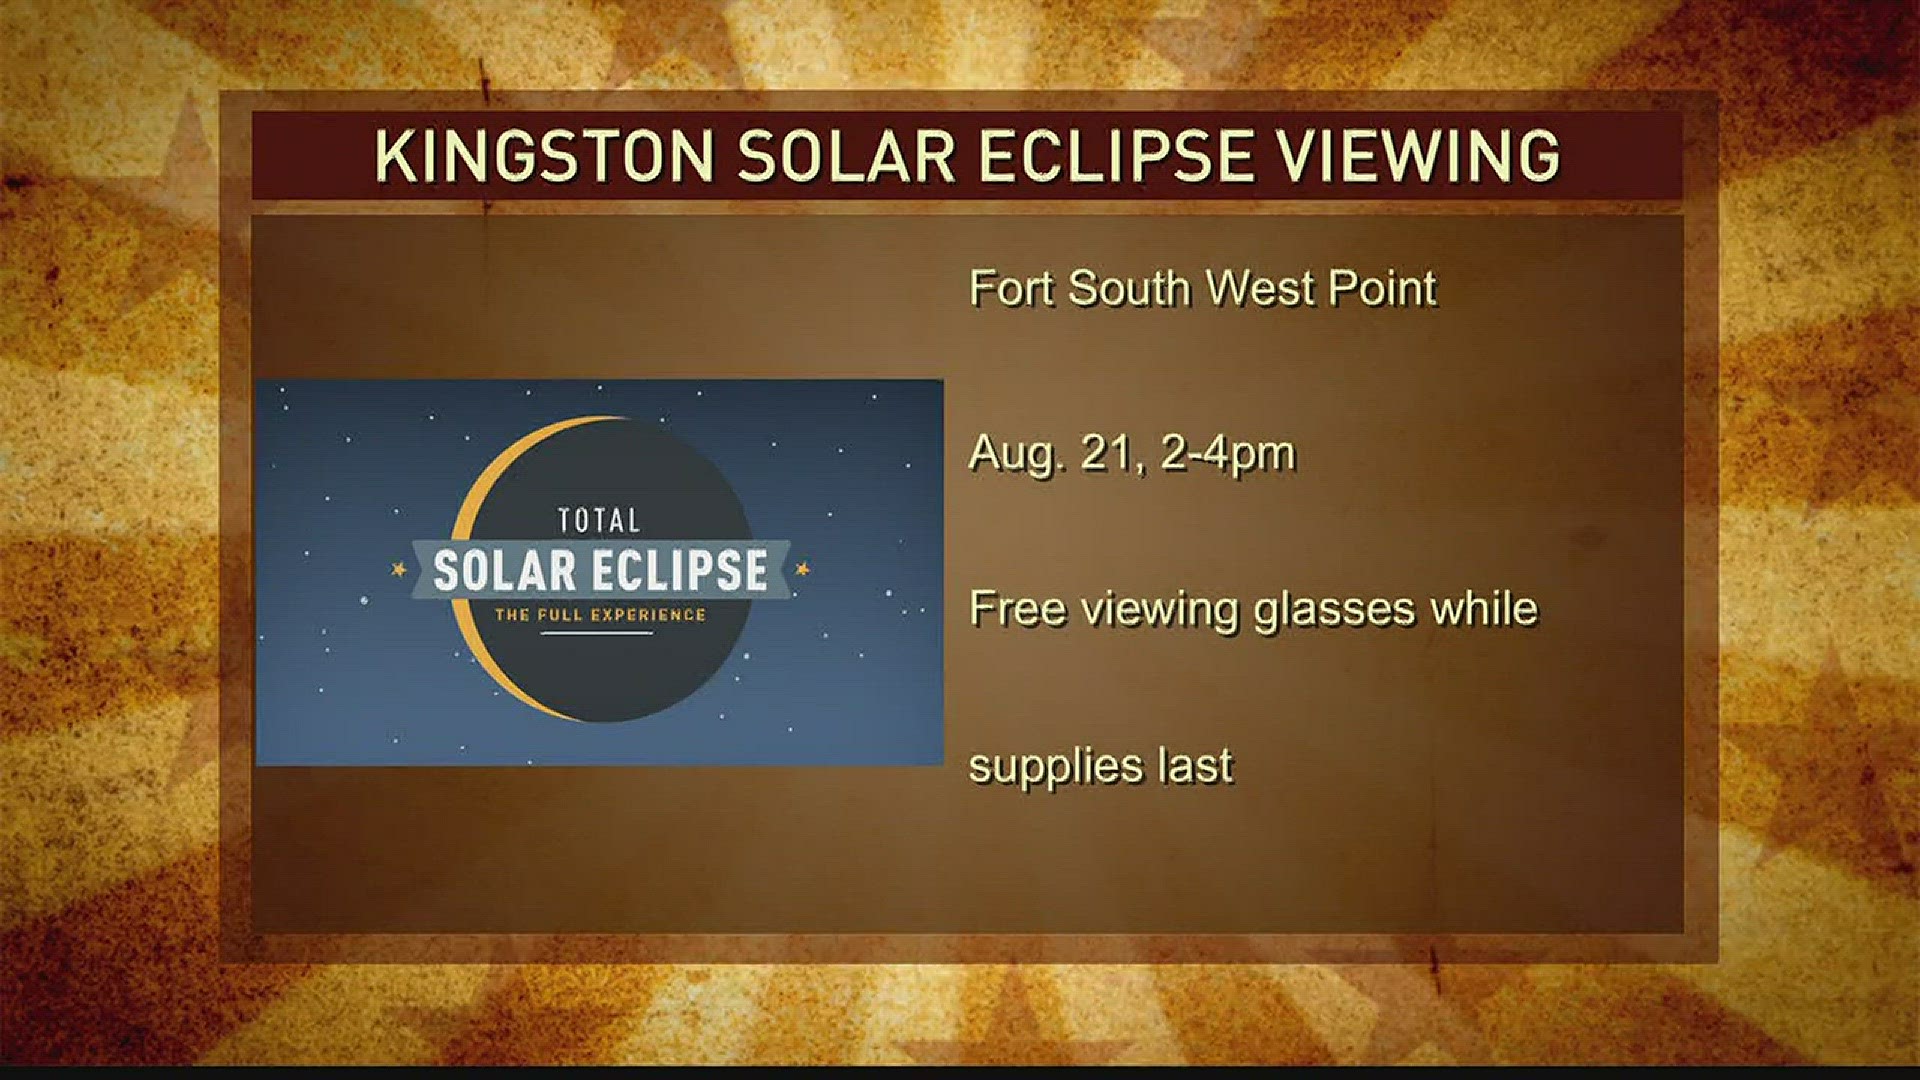 Kingston Will host a solar eclipse viewing event on August 21 from 2 to 4pm at Fort SOuthwest PointJuly 21, 2017, 4pm